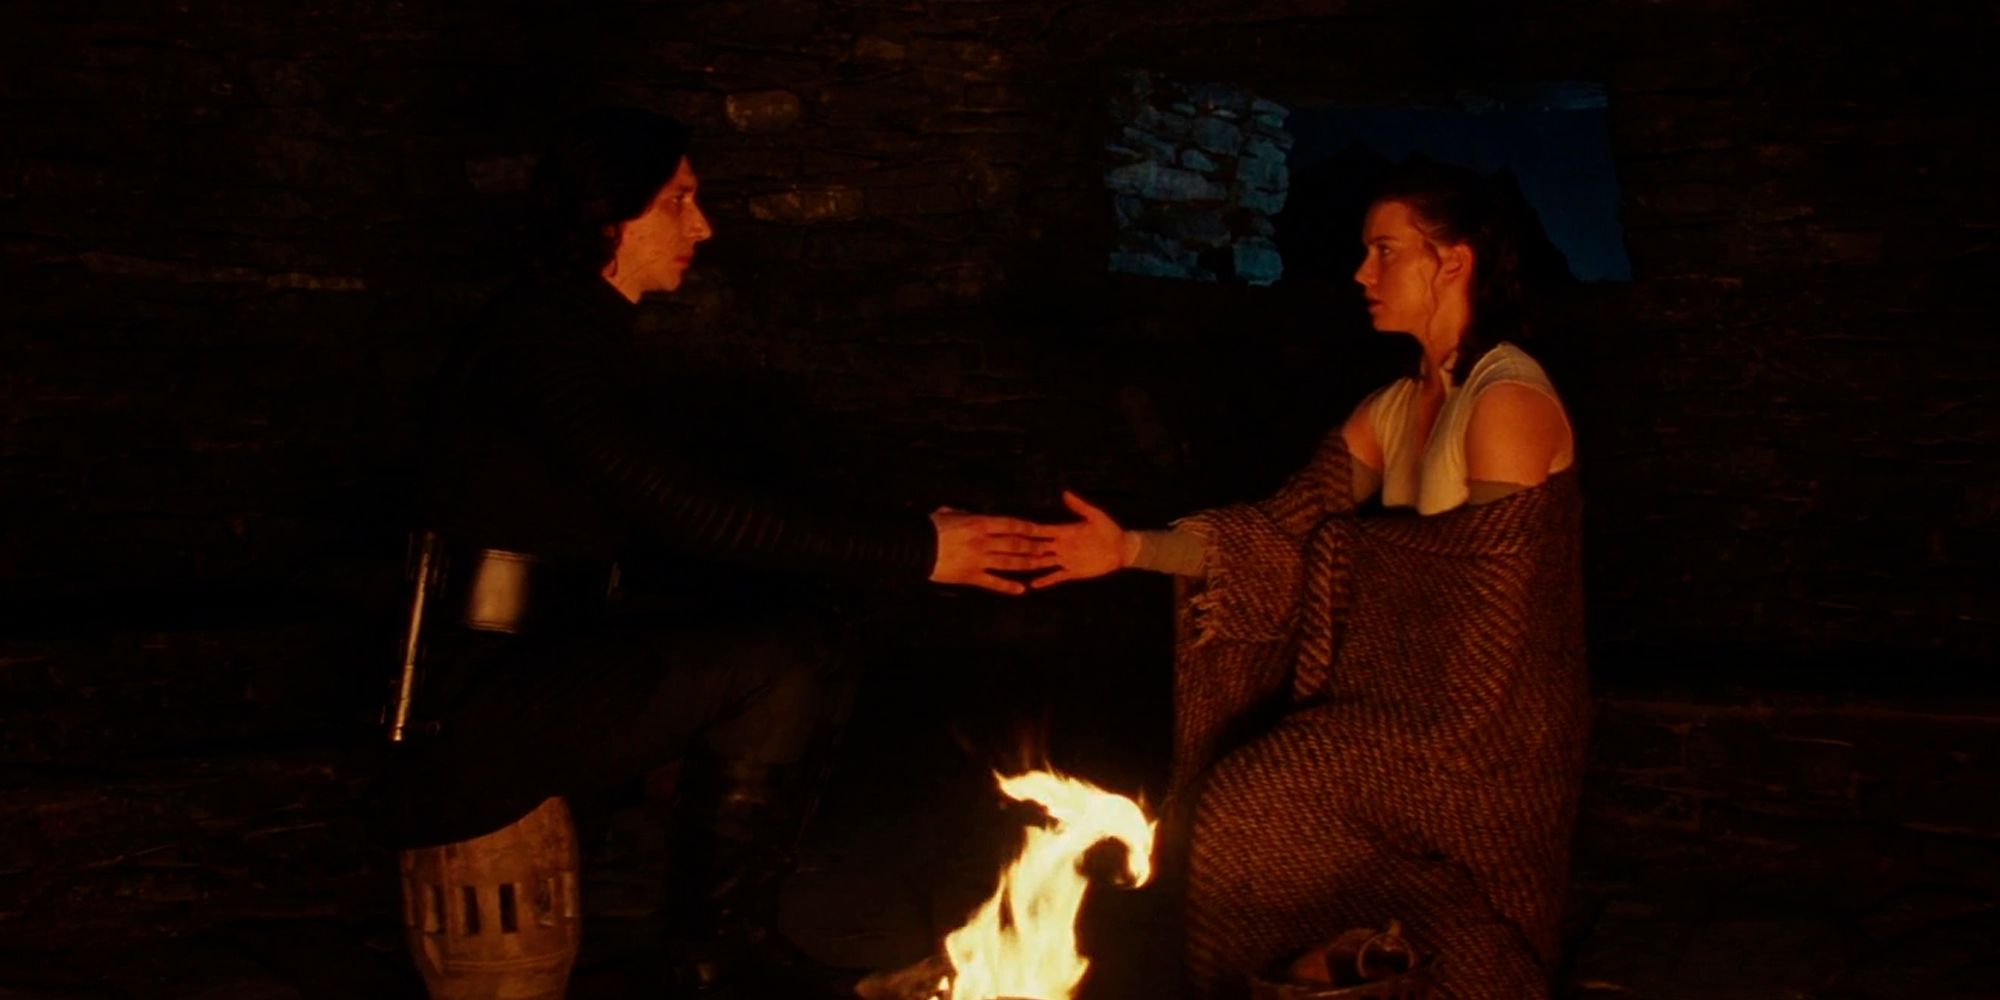 Kylo and Rey communicate with one another through the Force in The Last Jedi